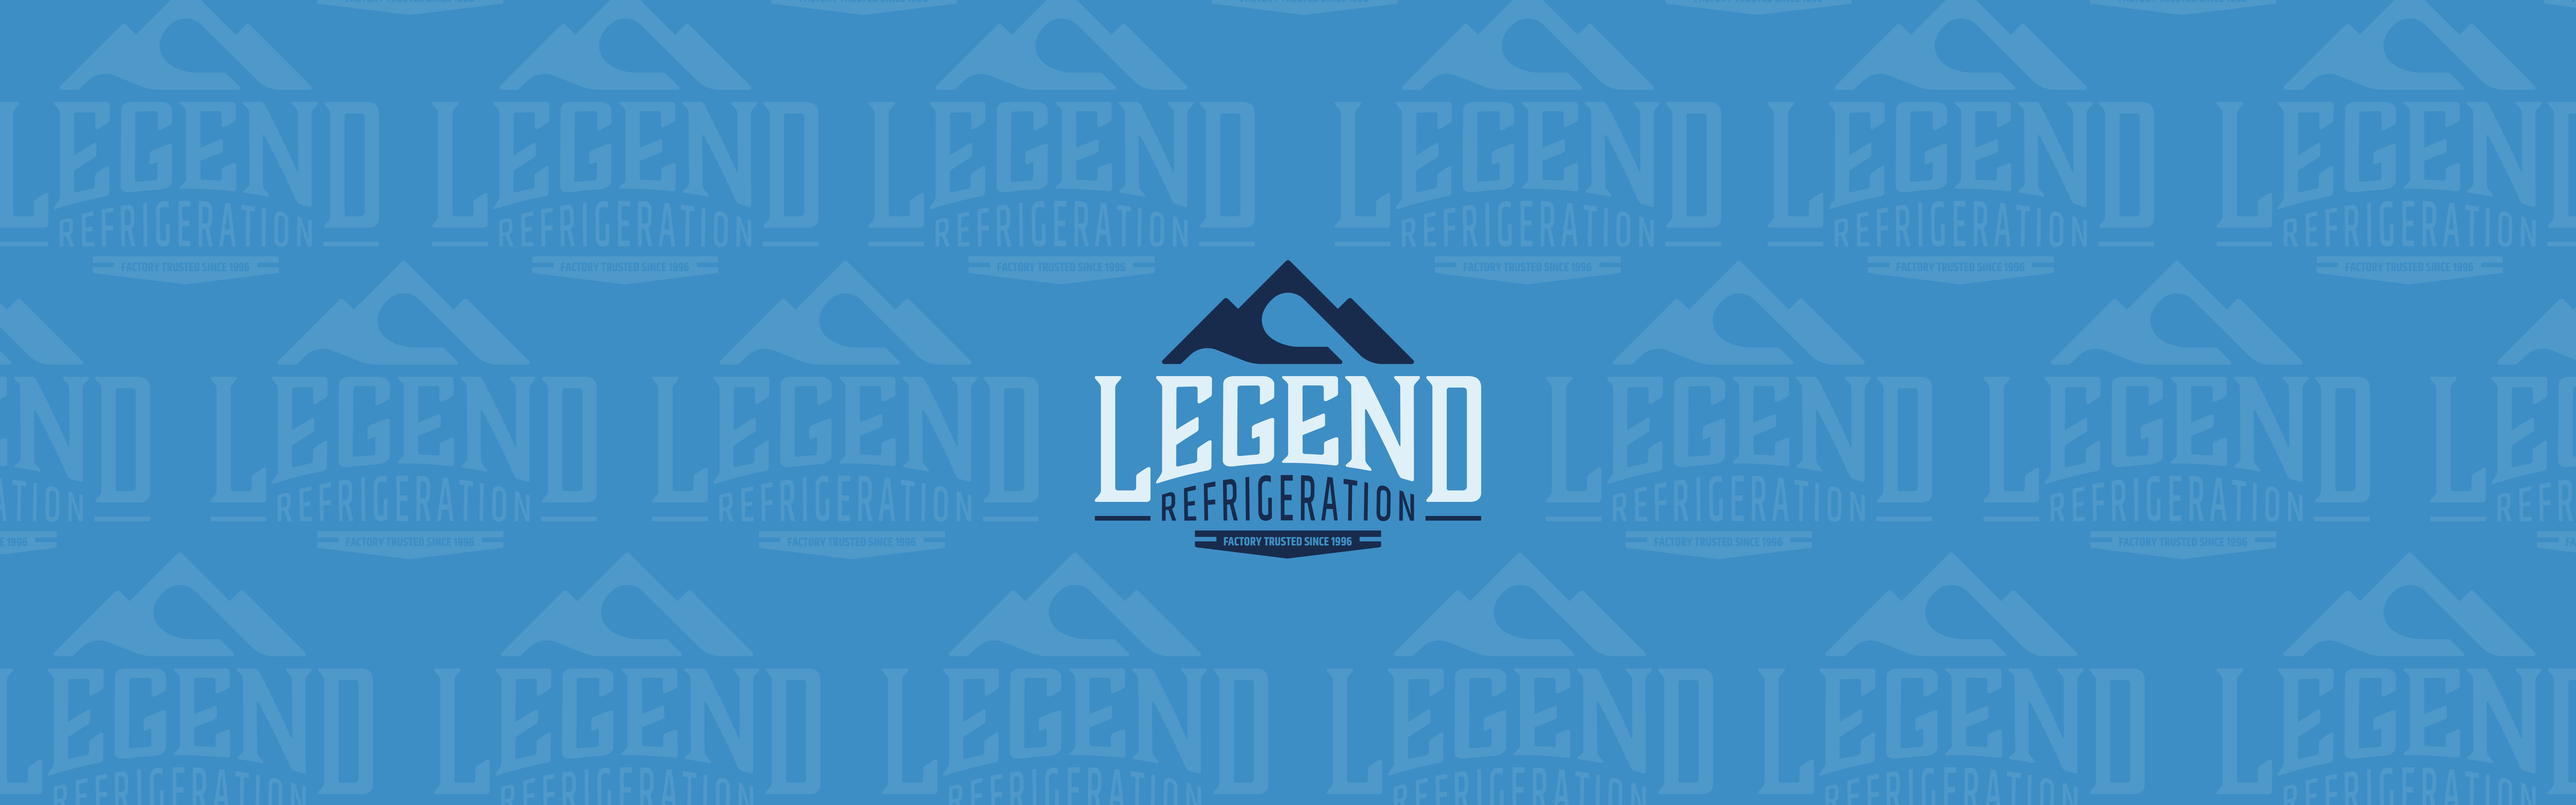 The image is a blue-toned graphical background with multiple repetitions of the word "legend" and an emblem-like illustration that appears to depict a mountain or peak. At the center, there is a Legend